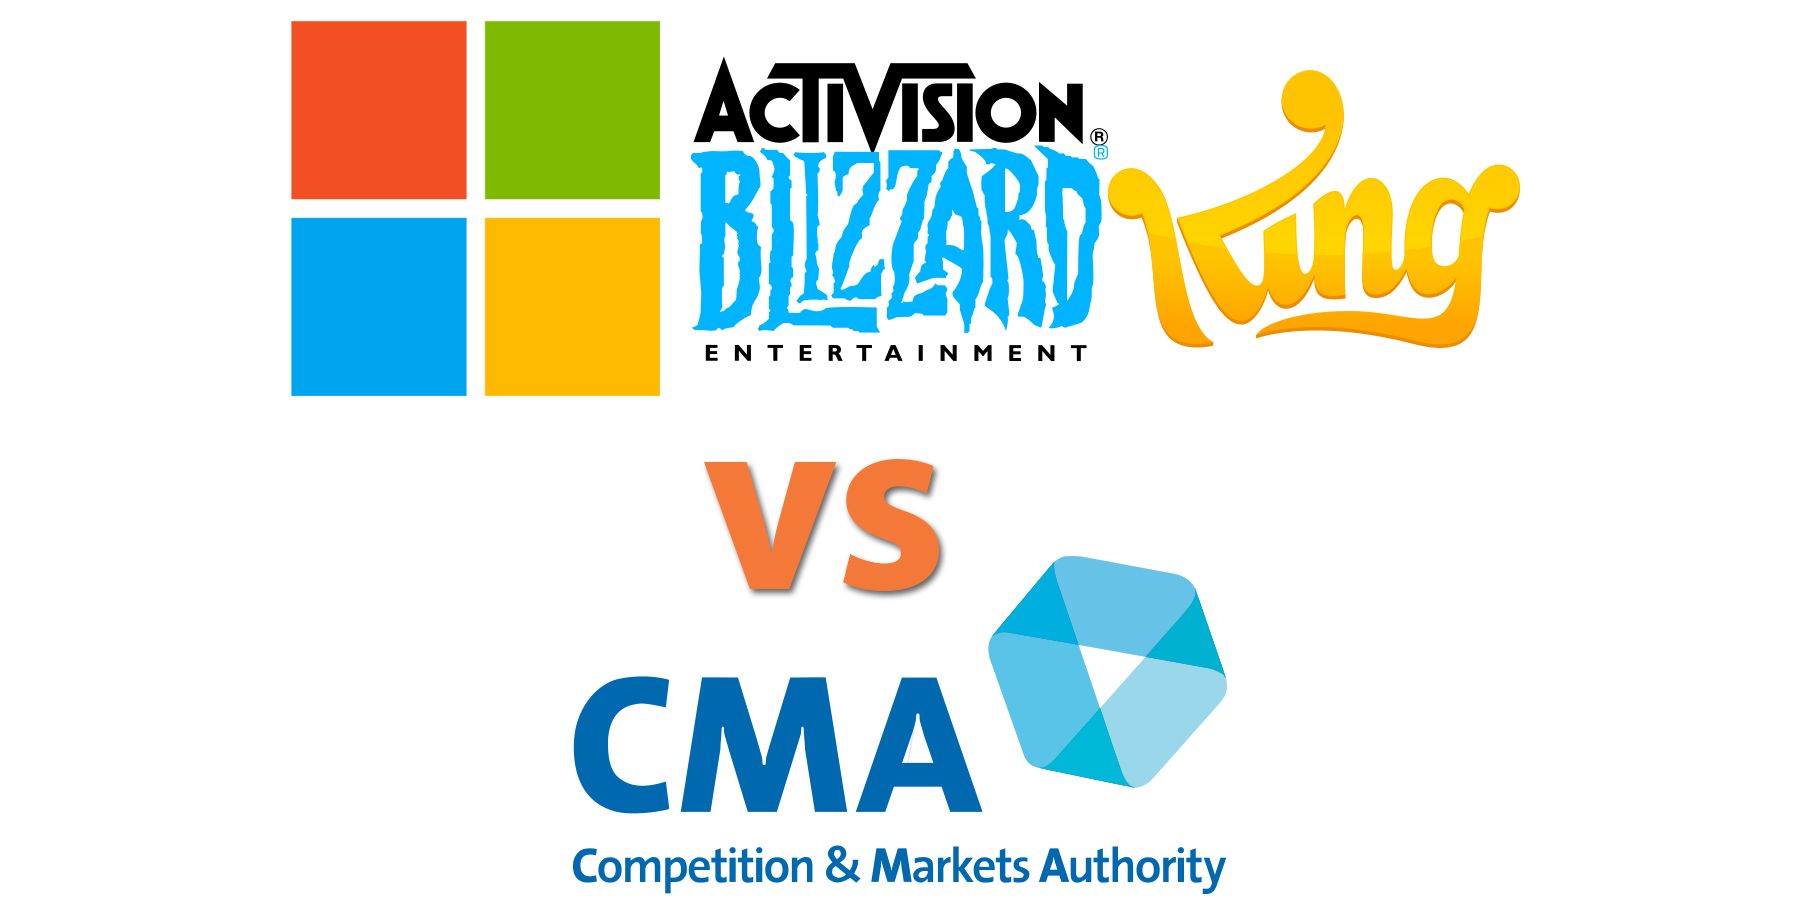 Microsoft Deal to Buy Activision Blizzard Is Officially Blocked by UK's CMA